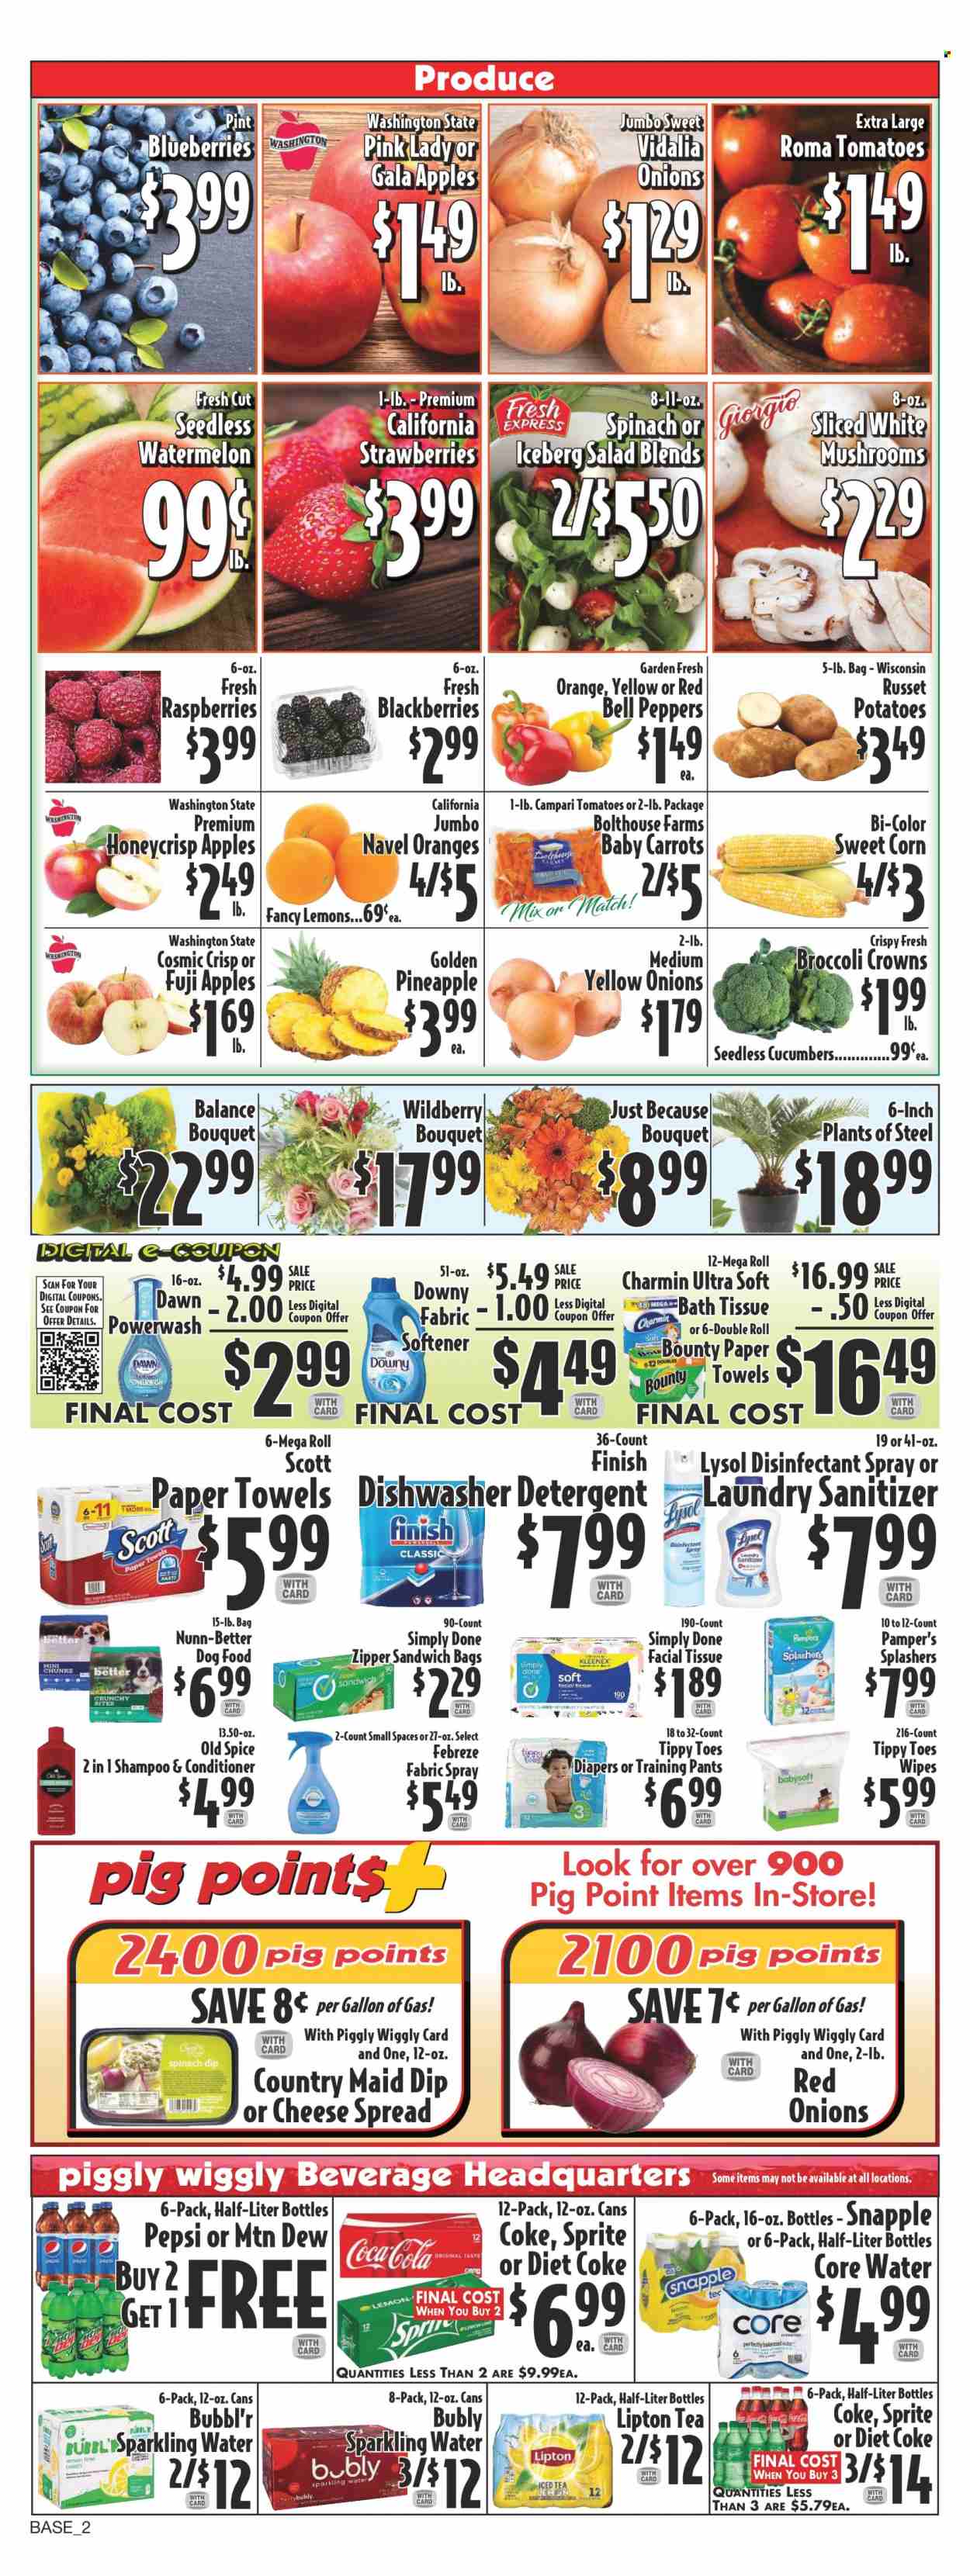 thumbnail - Piggly Wiggly Flyer - 05/31/2023 - 06/06/2023 - Sales products - mushrooms, bell peppers, carrots, corn, cucumber, red onions, russet potatoes, tomatoes, potatoes, onion, salad, peppers, sweet corn, apples, blackberries, blueberries, Gala, raspberries, strawberries, watermelon, pineapple, Fuji apple, Pink Lady, cheese spread, dip, Bounty, Coca-Cola, Mountain Dew, Sprite, Pepsi, Lipton, Diet Coke, soft drink, Snapple, Coke, sparkling water, water, tea, lemons, navel oranges. Page 2.